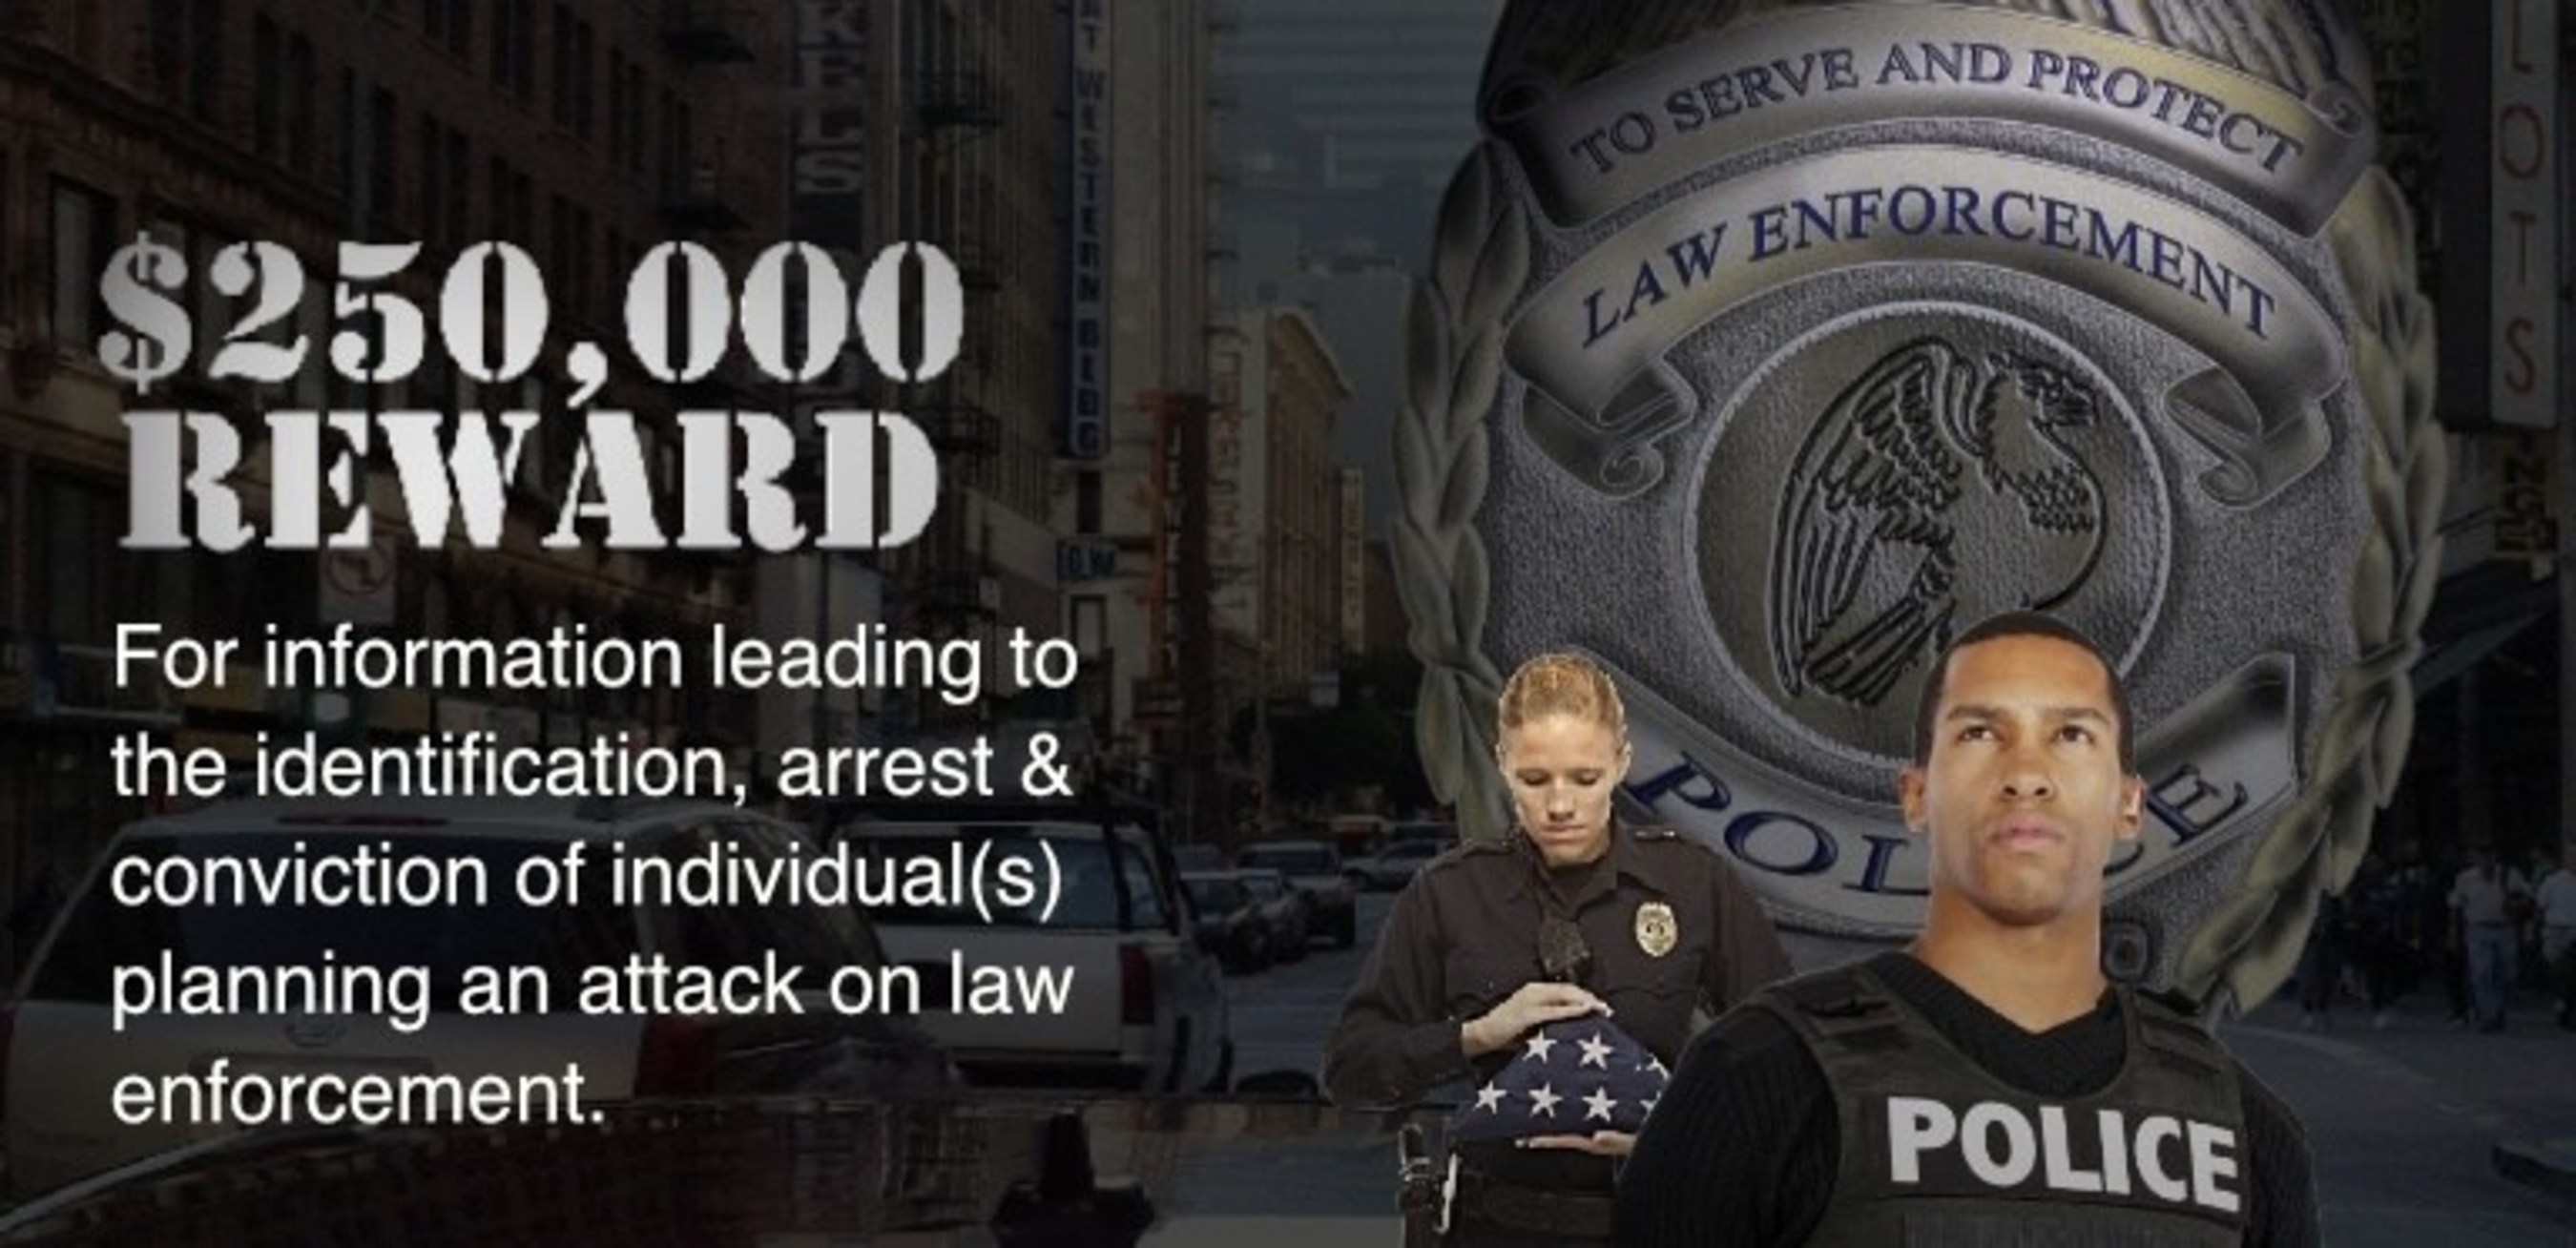 $250,000 Reward - Info to Prevent Planned Ambush Attacks on Police Officers